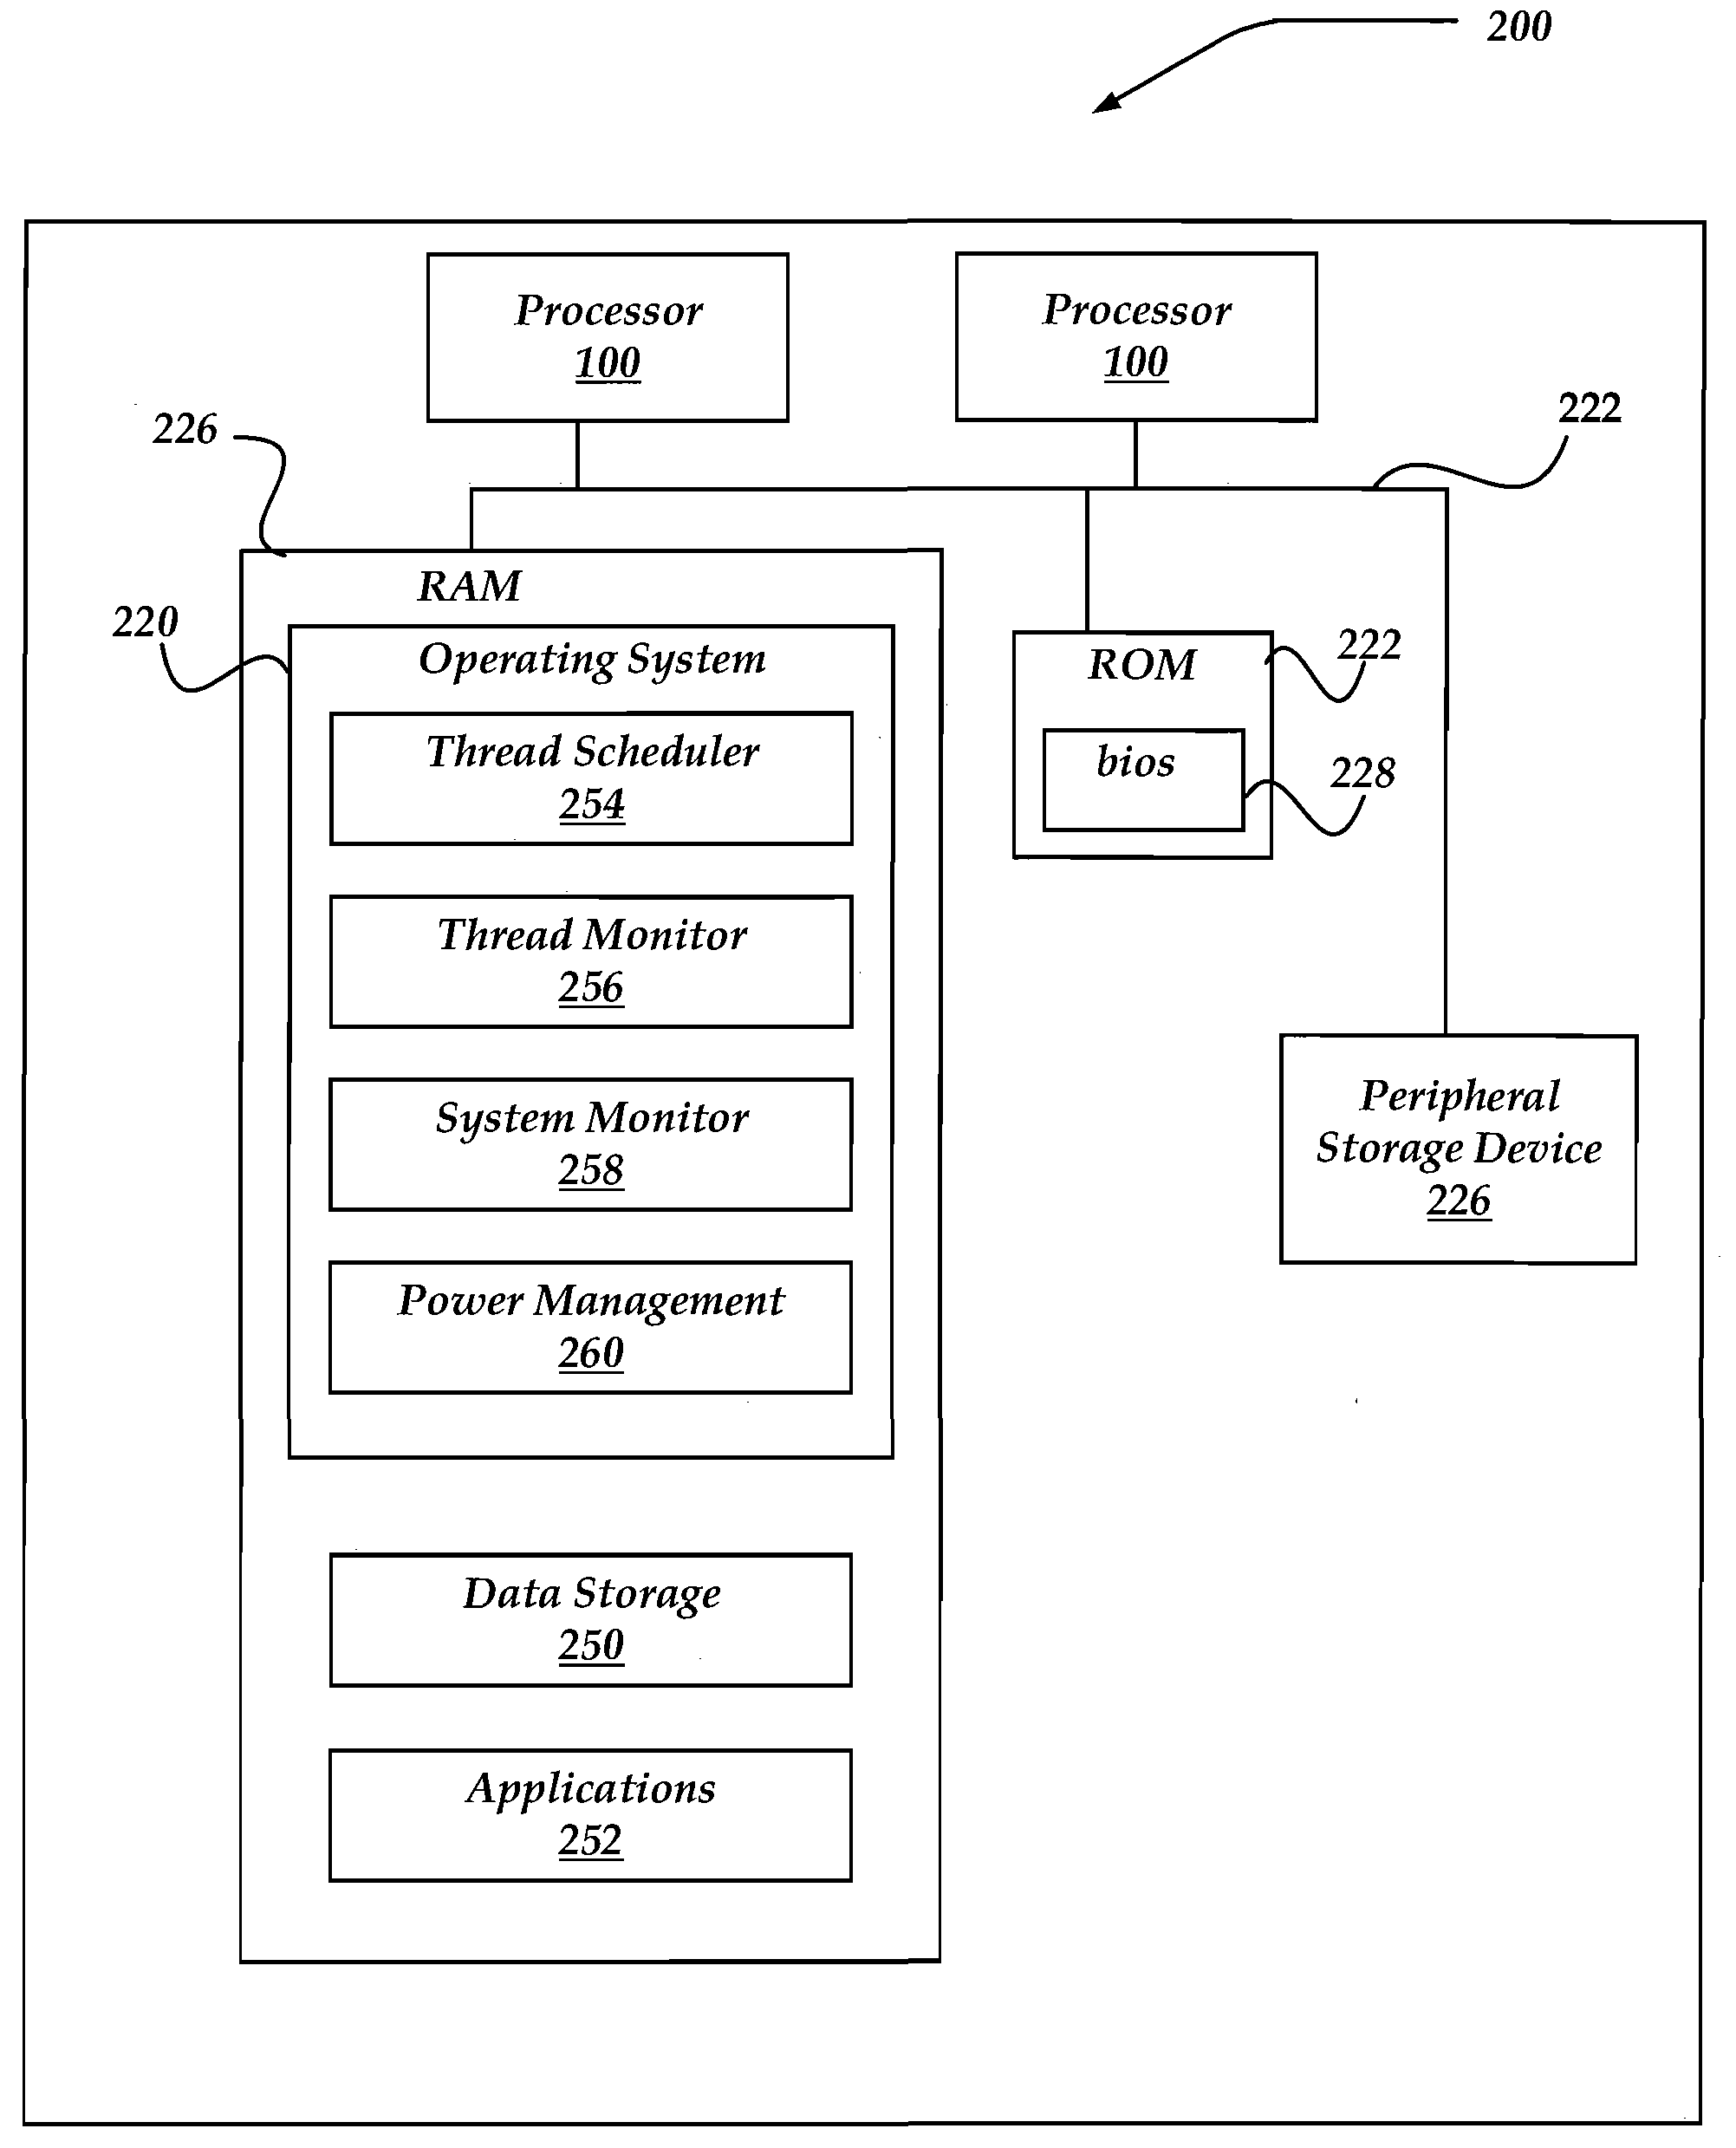 Hardware utilization-aware thread management in multithreaded computer systems